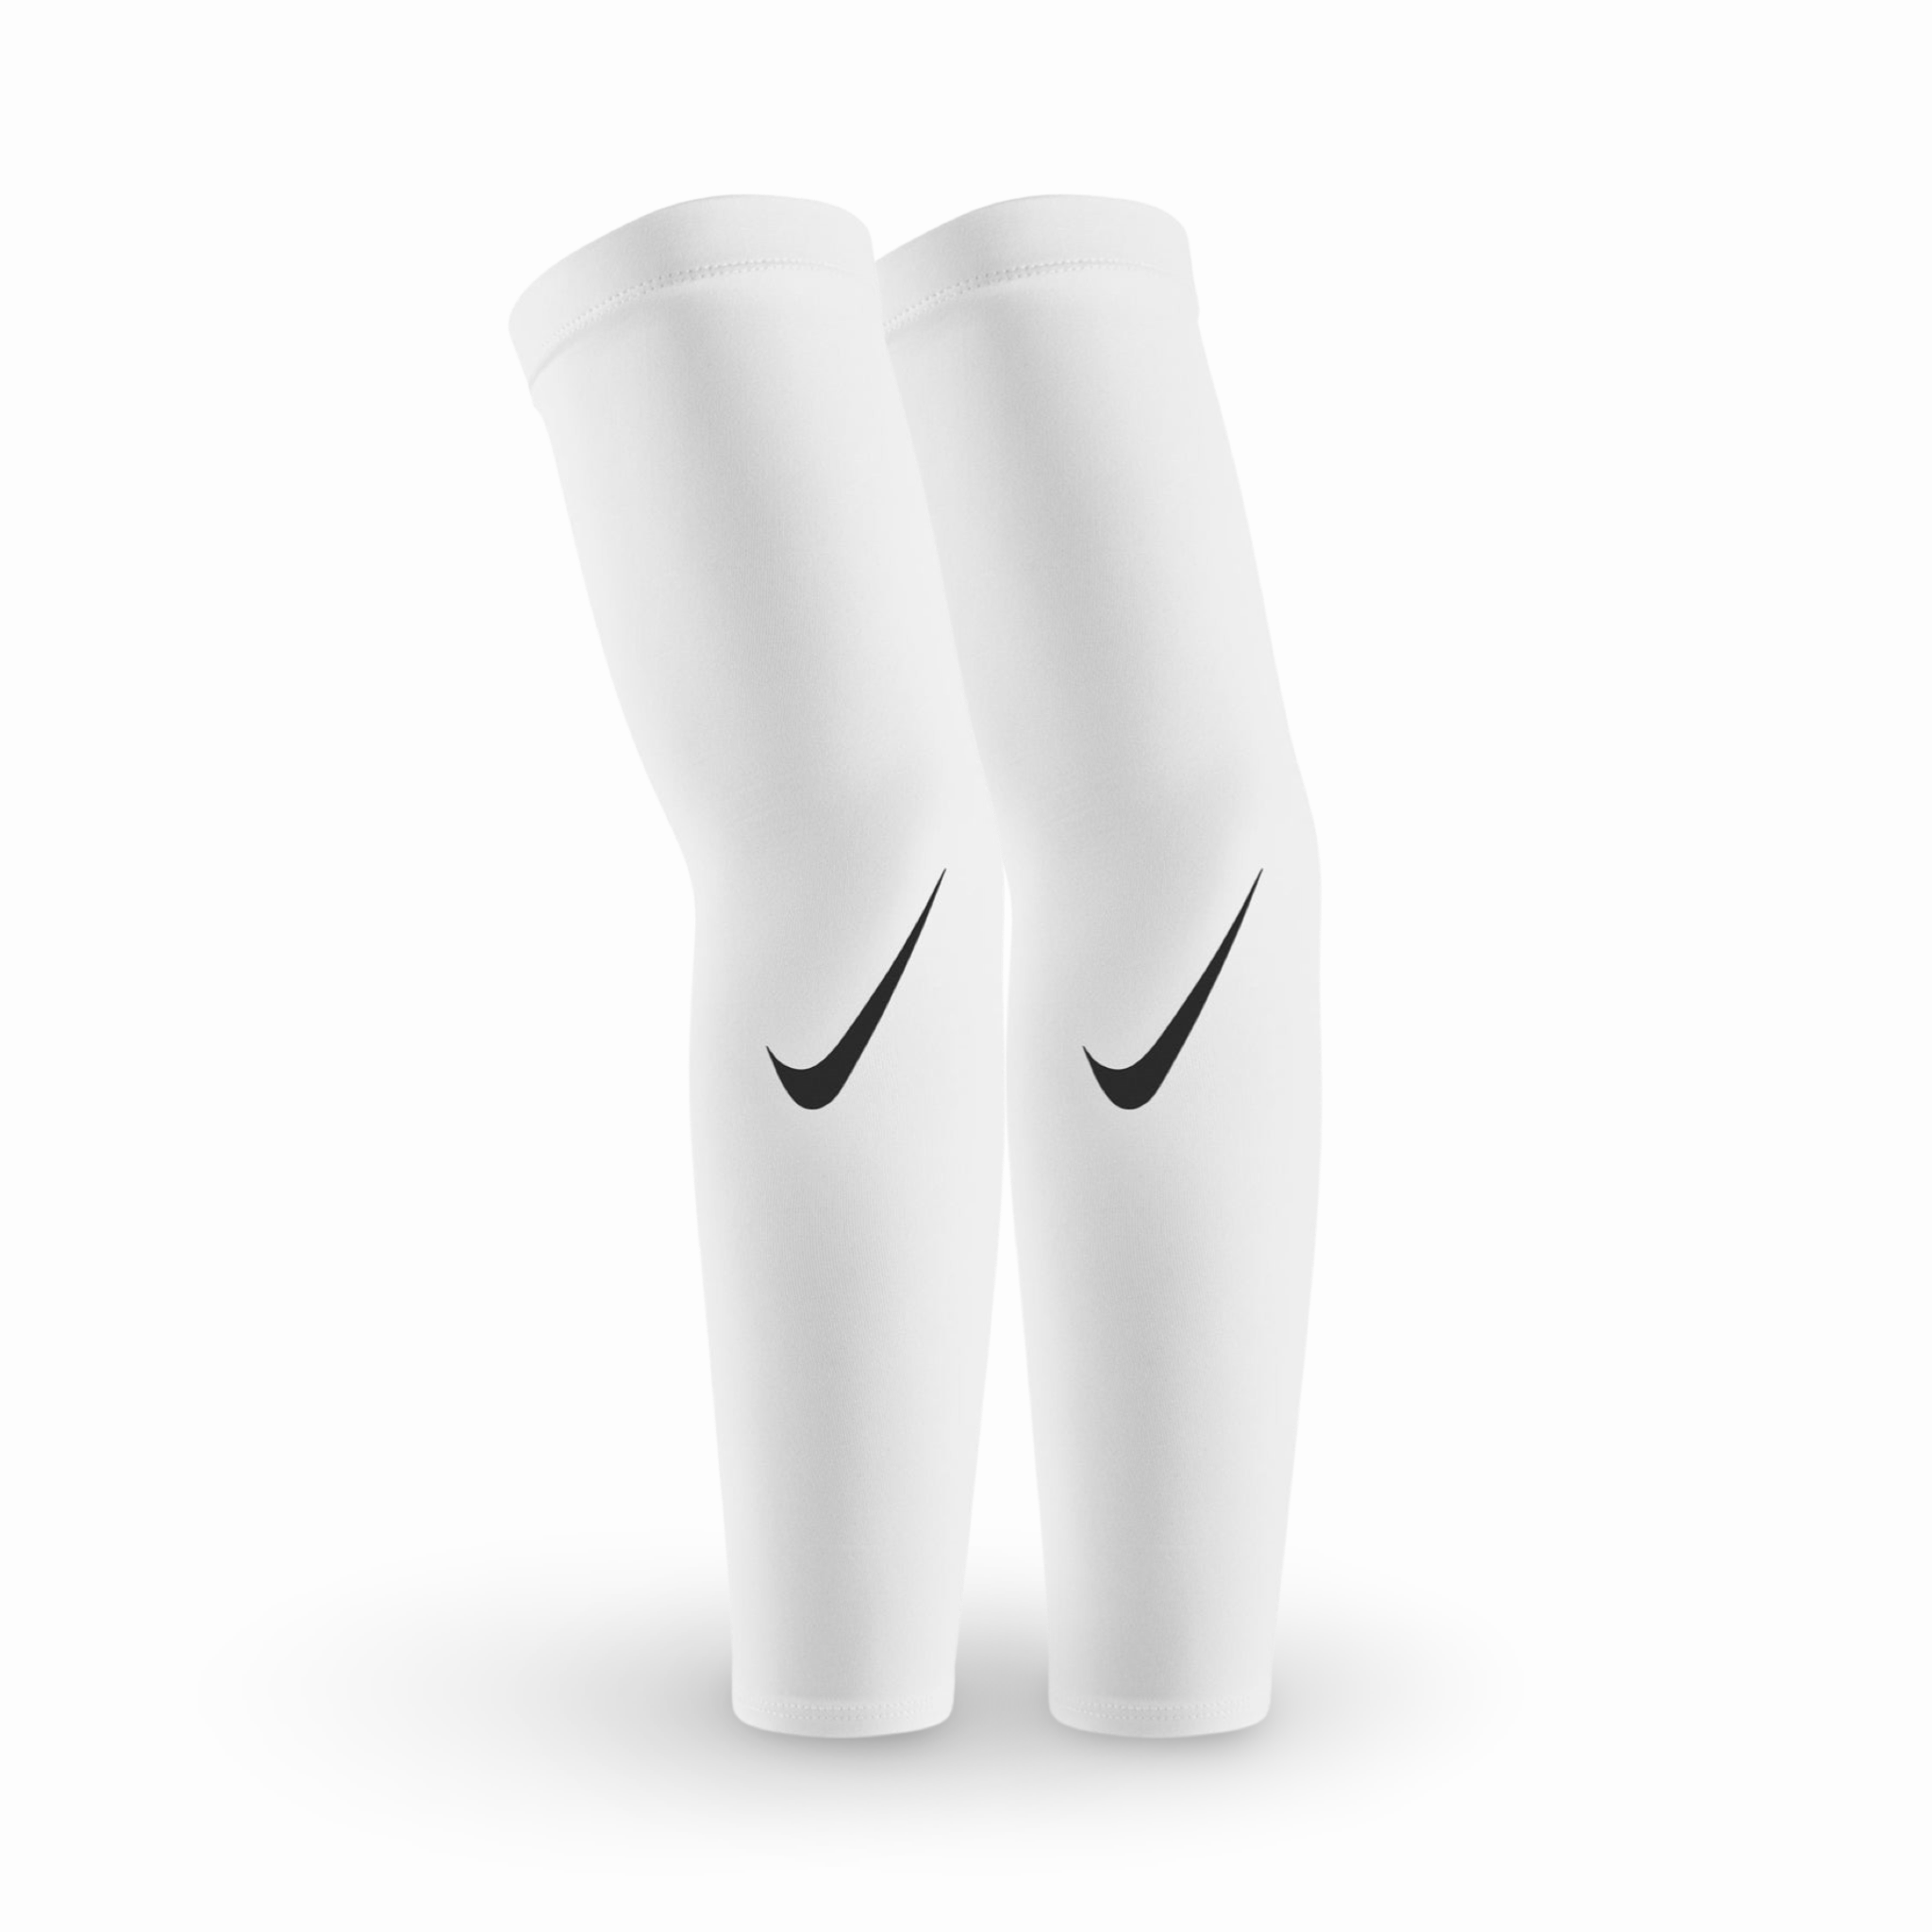 Nike Pro Dri-fit Arm Sleeves 4.0 - Adult & Youth